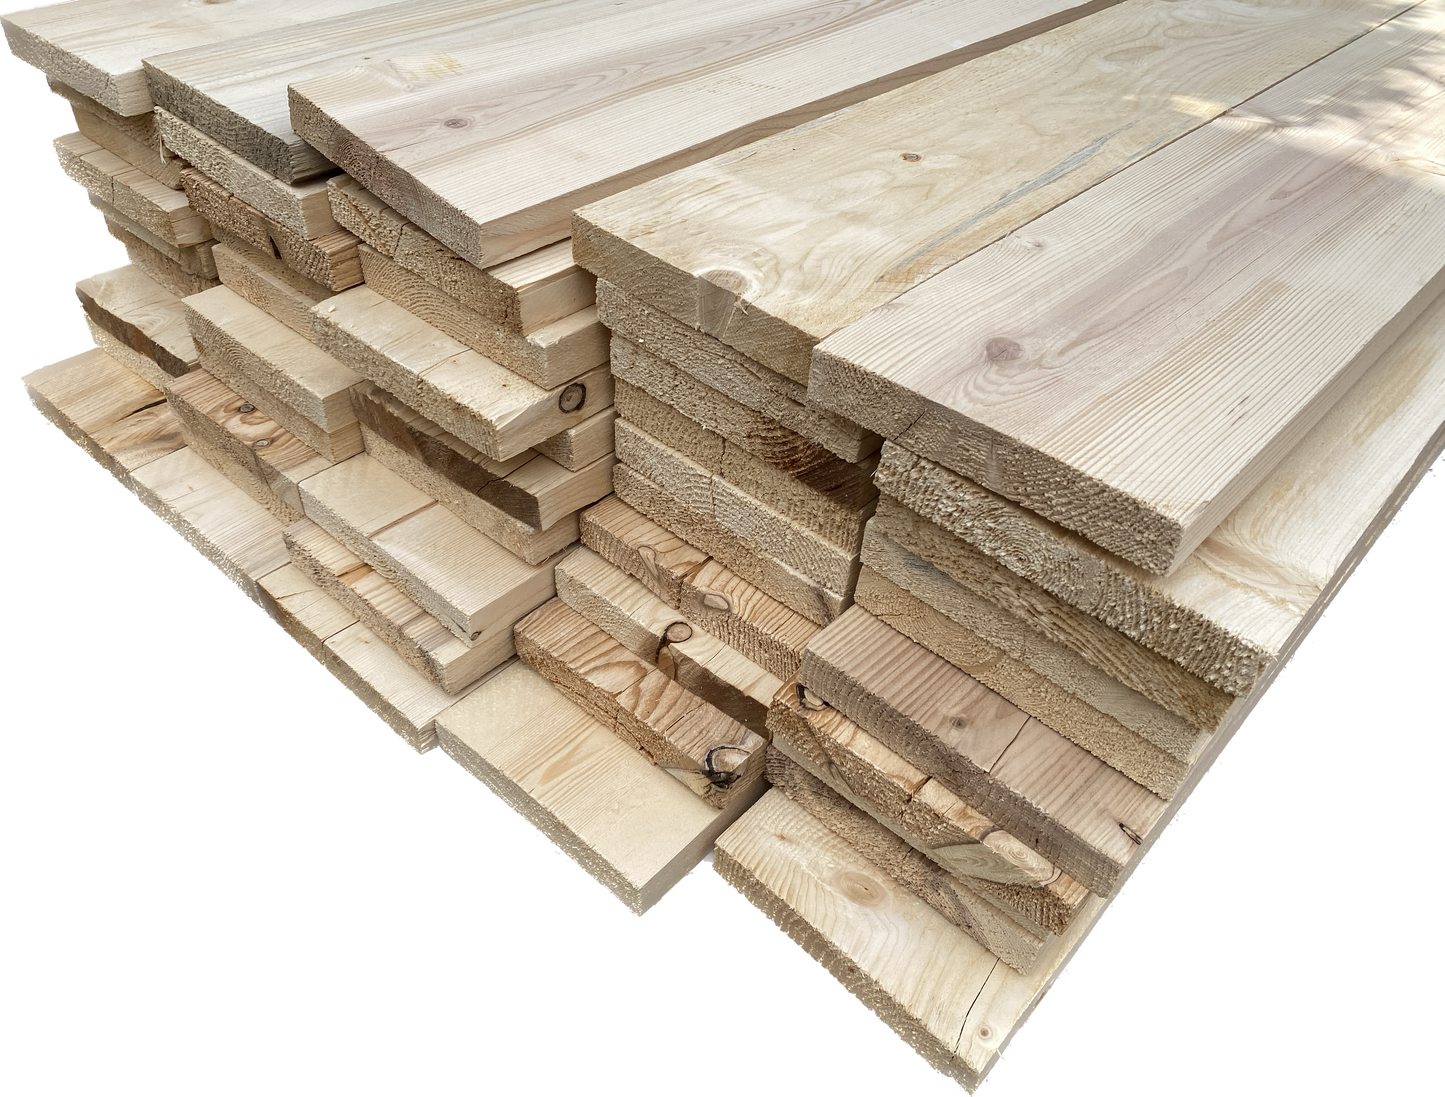 Scaffold Boards Cut To Size Unfinished, Rustic Wooden Planks Shelves or Furniture, DIY Project, New Wood Boards, Leicester Scaffold Boards Wood 